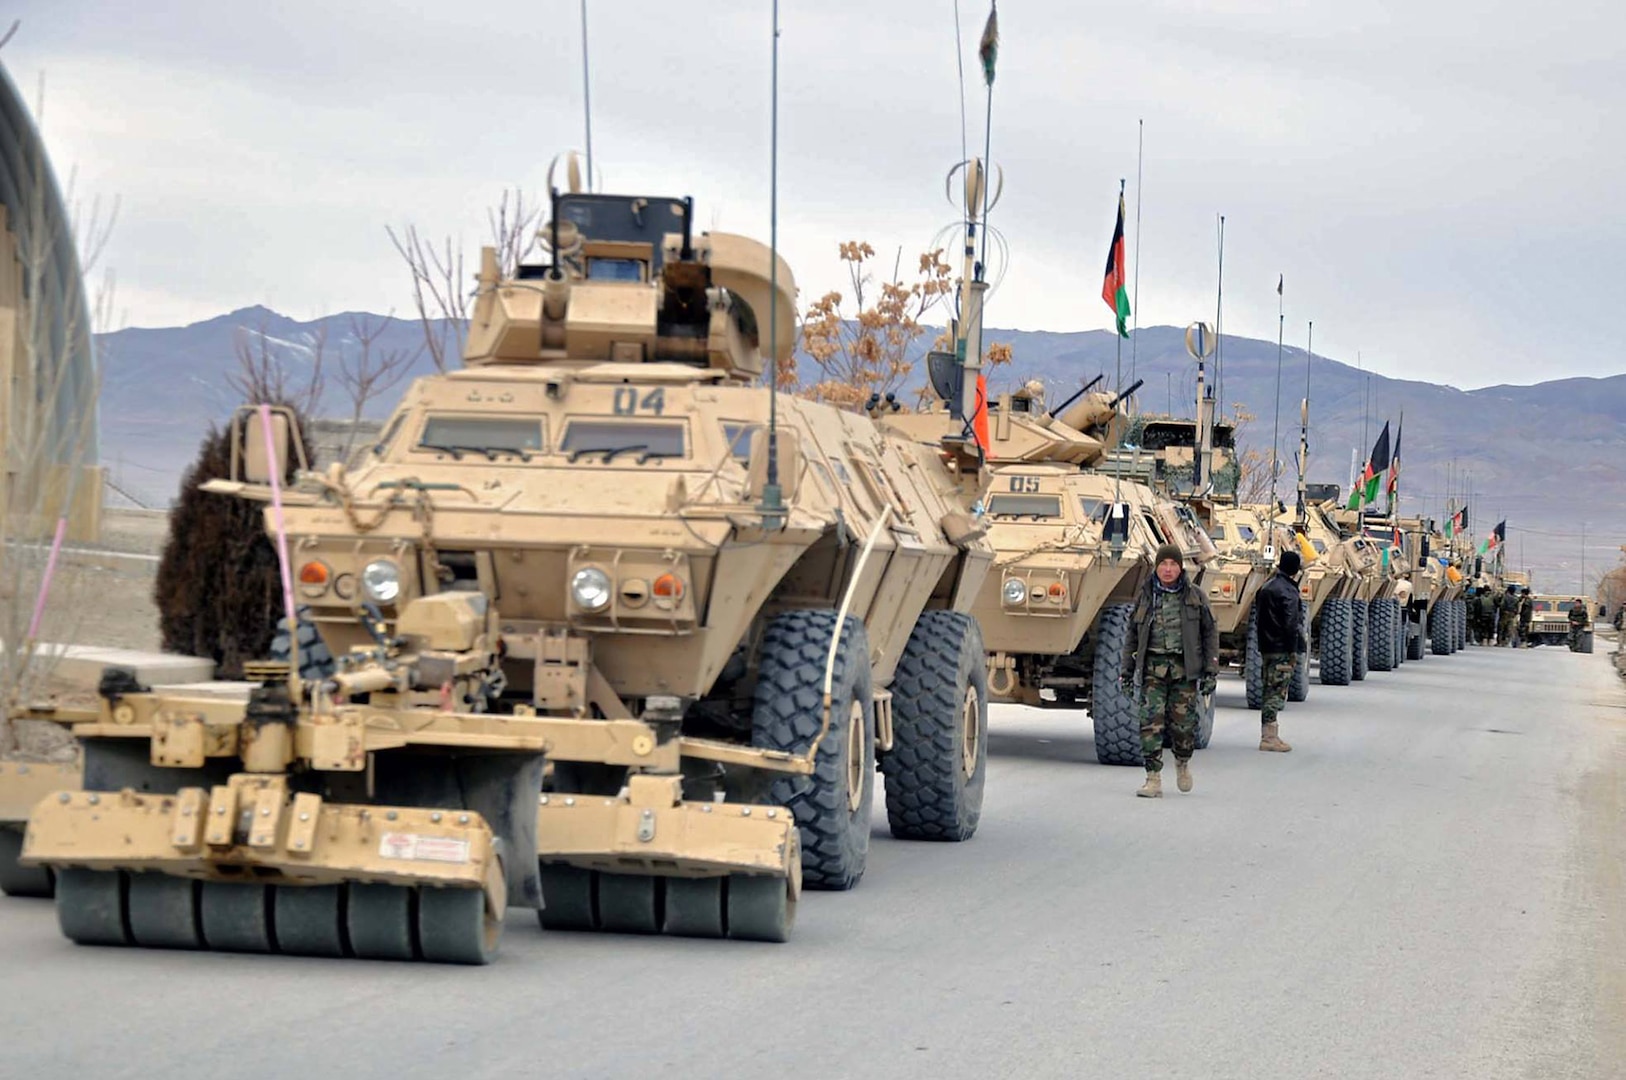 Afghanistan National Army Soldiers from 203rd “Thunder” Corps based out of FOB Thunder in Gardez, Afghanistan assemble for convoy-route clearance operations May 25 in Tagab district of Ghazni province. (Afghanistan National Army photo provided by 203rd Corps PAO.)